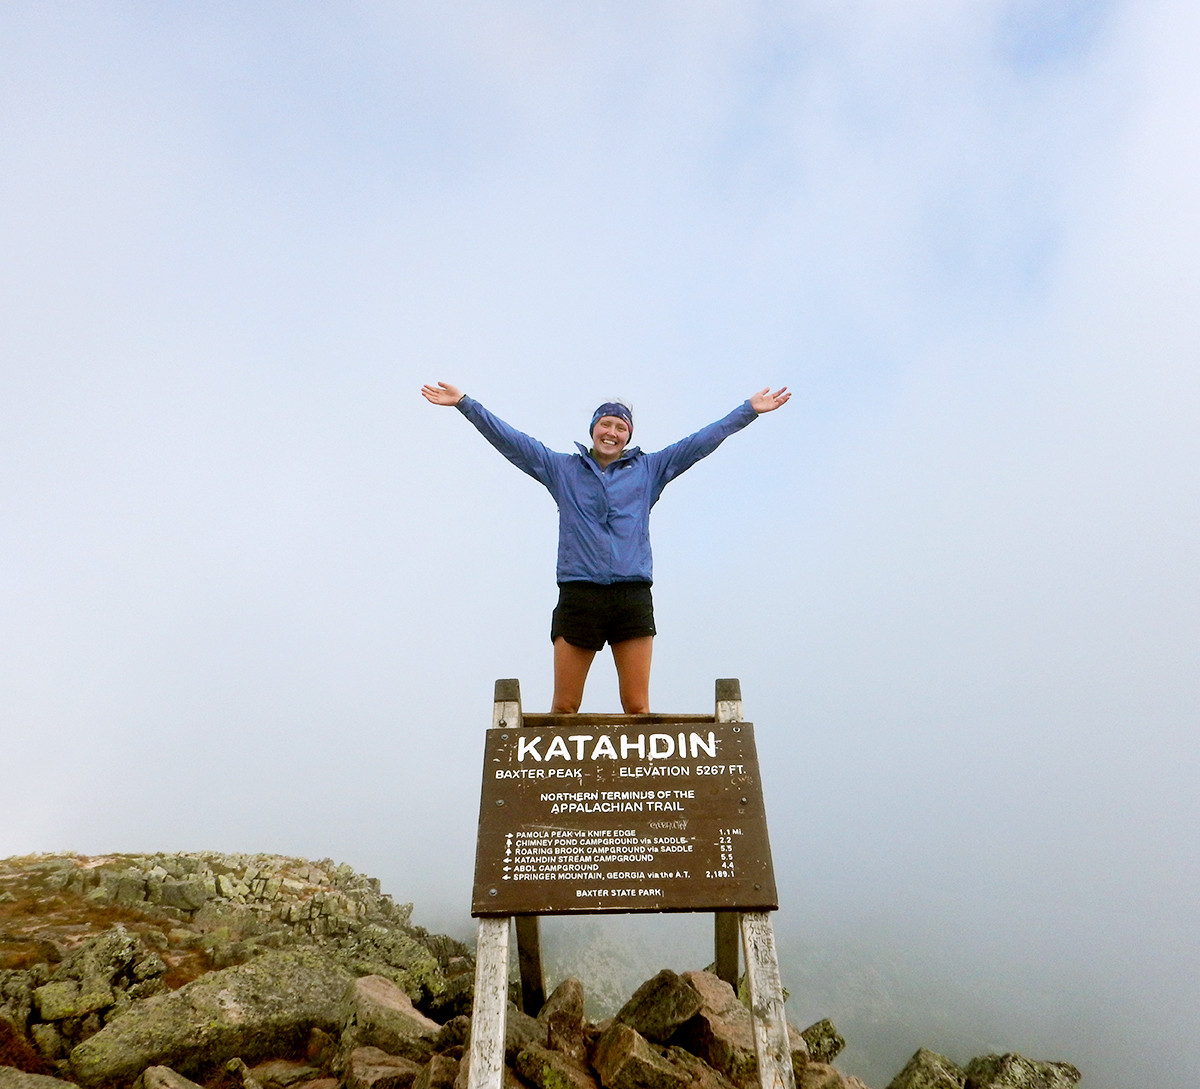 Tess stands with her arms raised on the top of Mount Katahdin